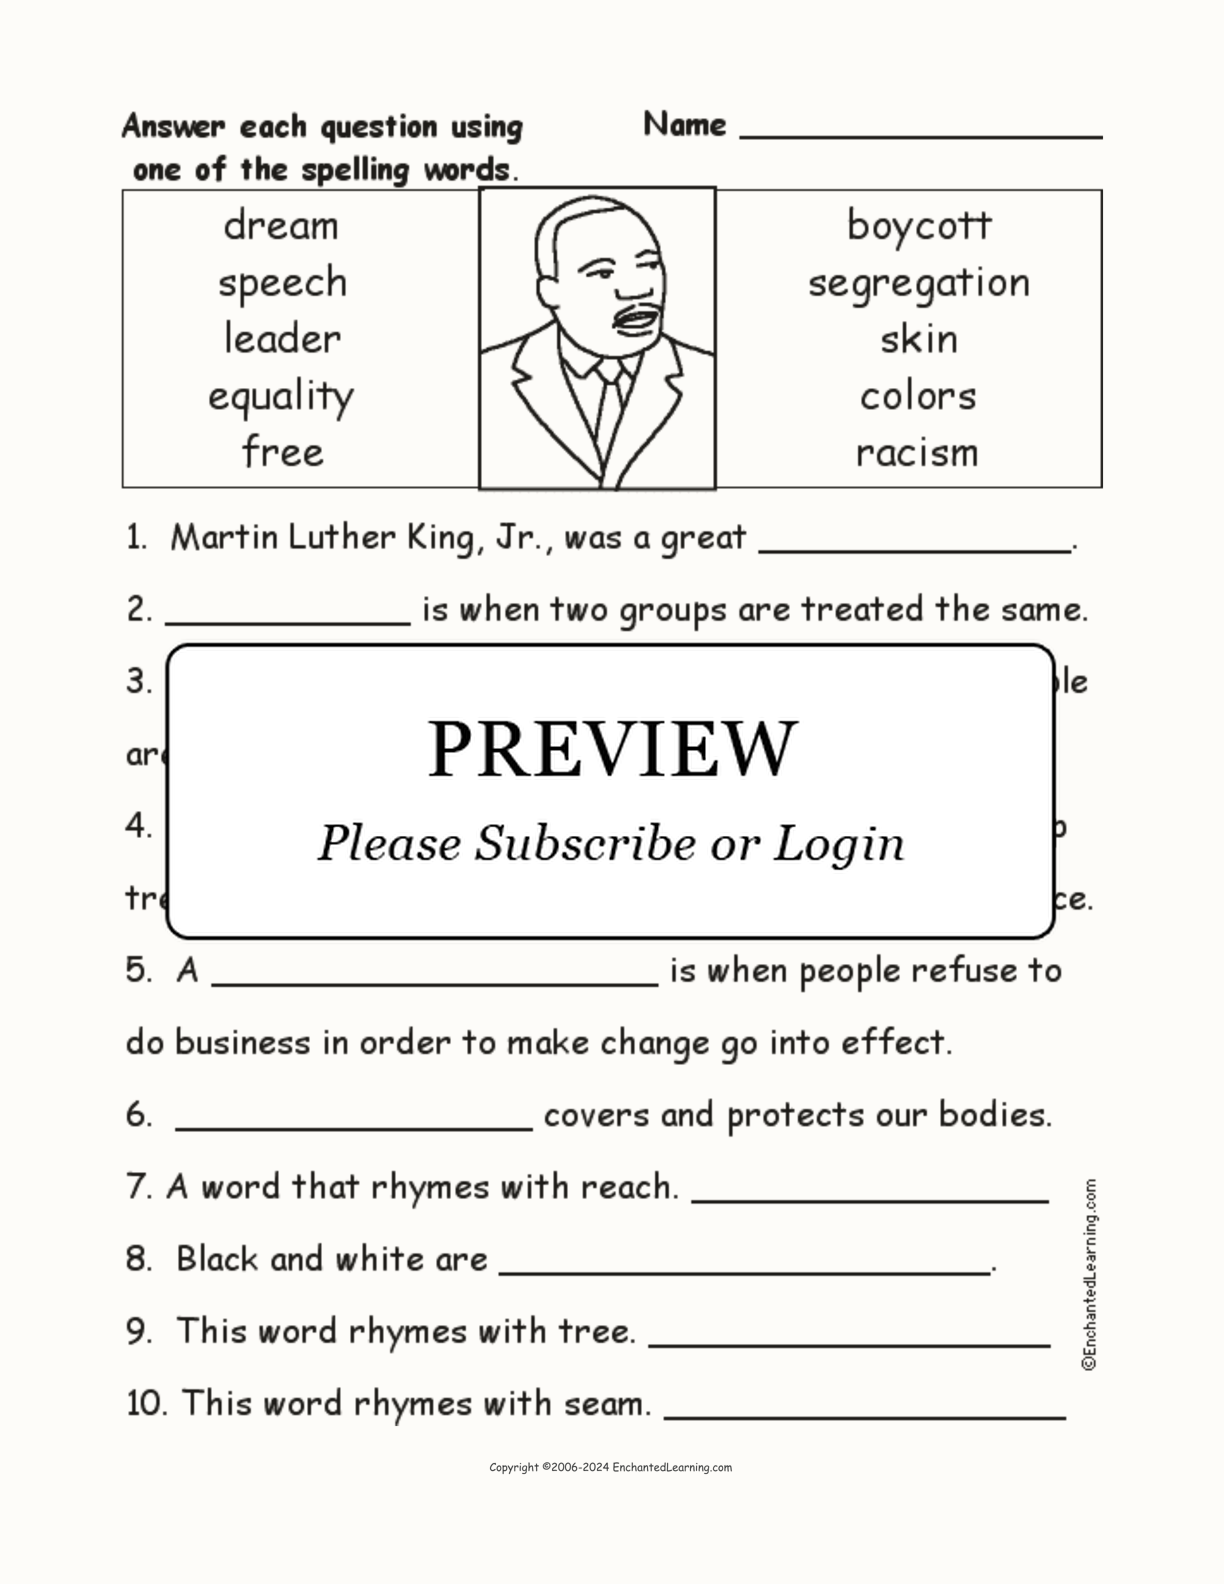 Martin Luther King, Jr., Spelling Word Questions interactive worksheet page 1